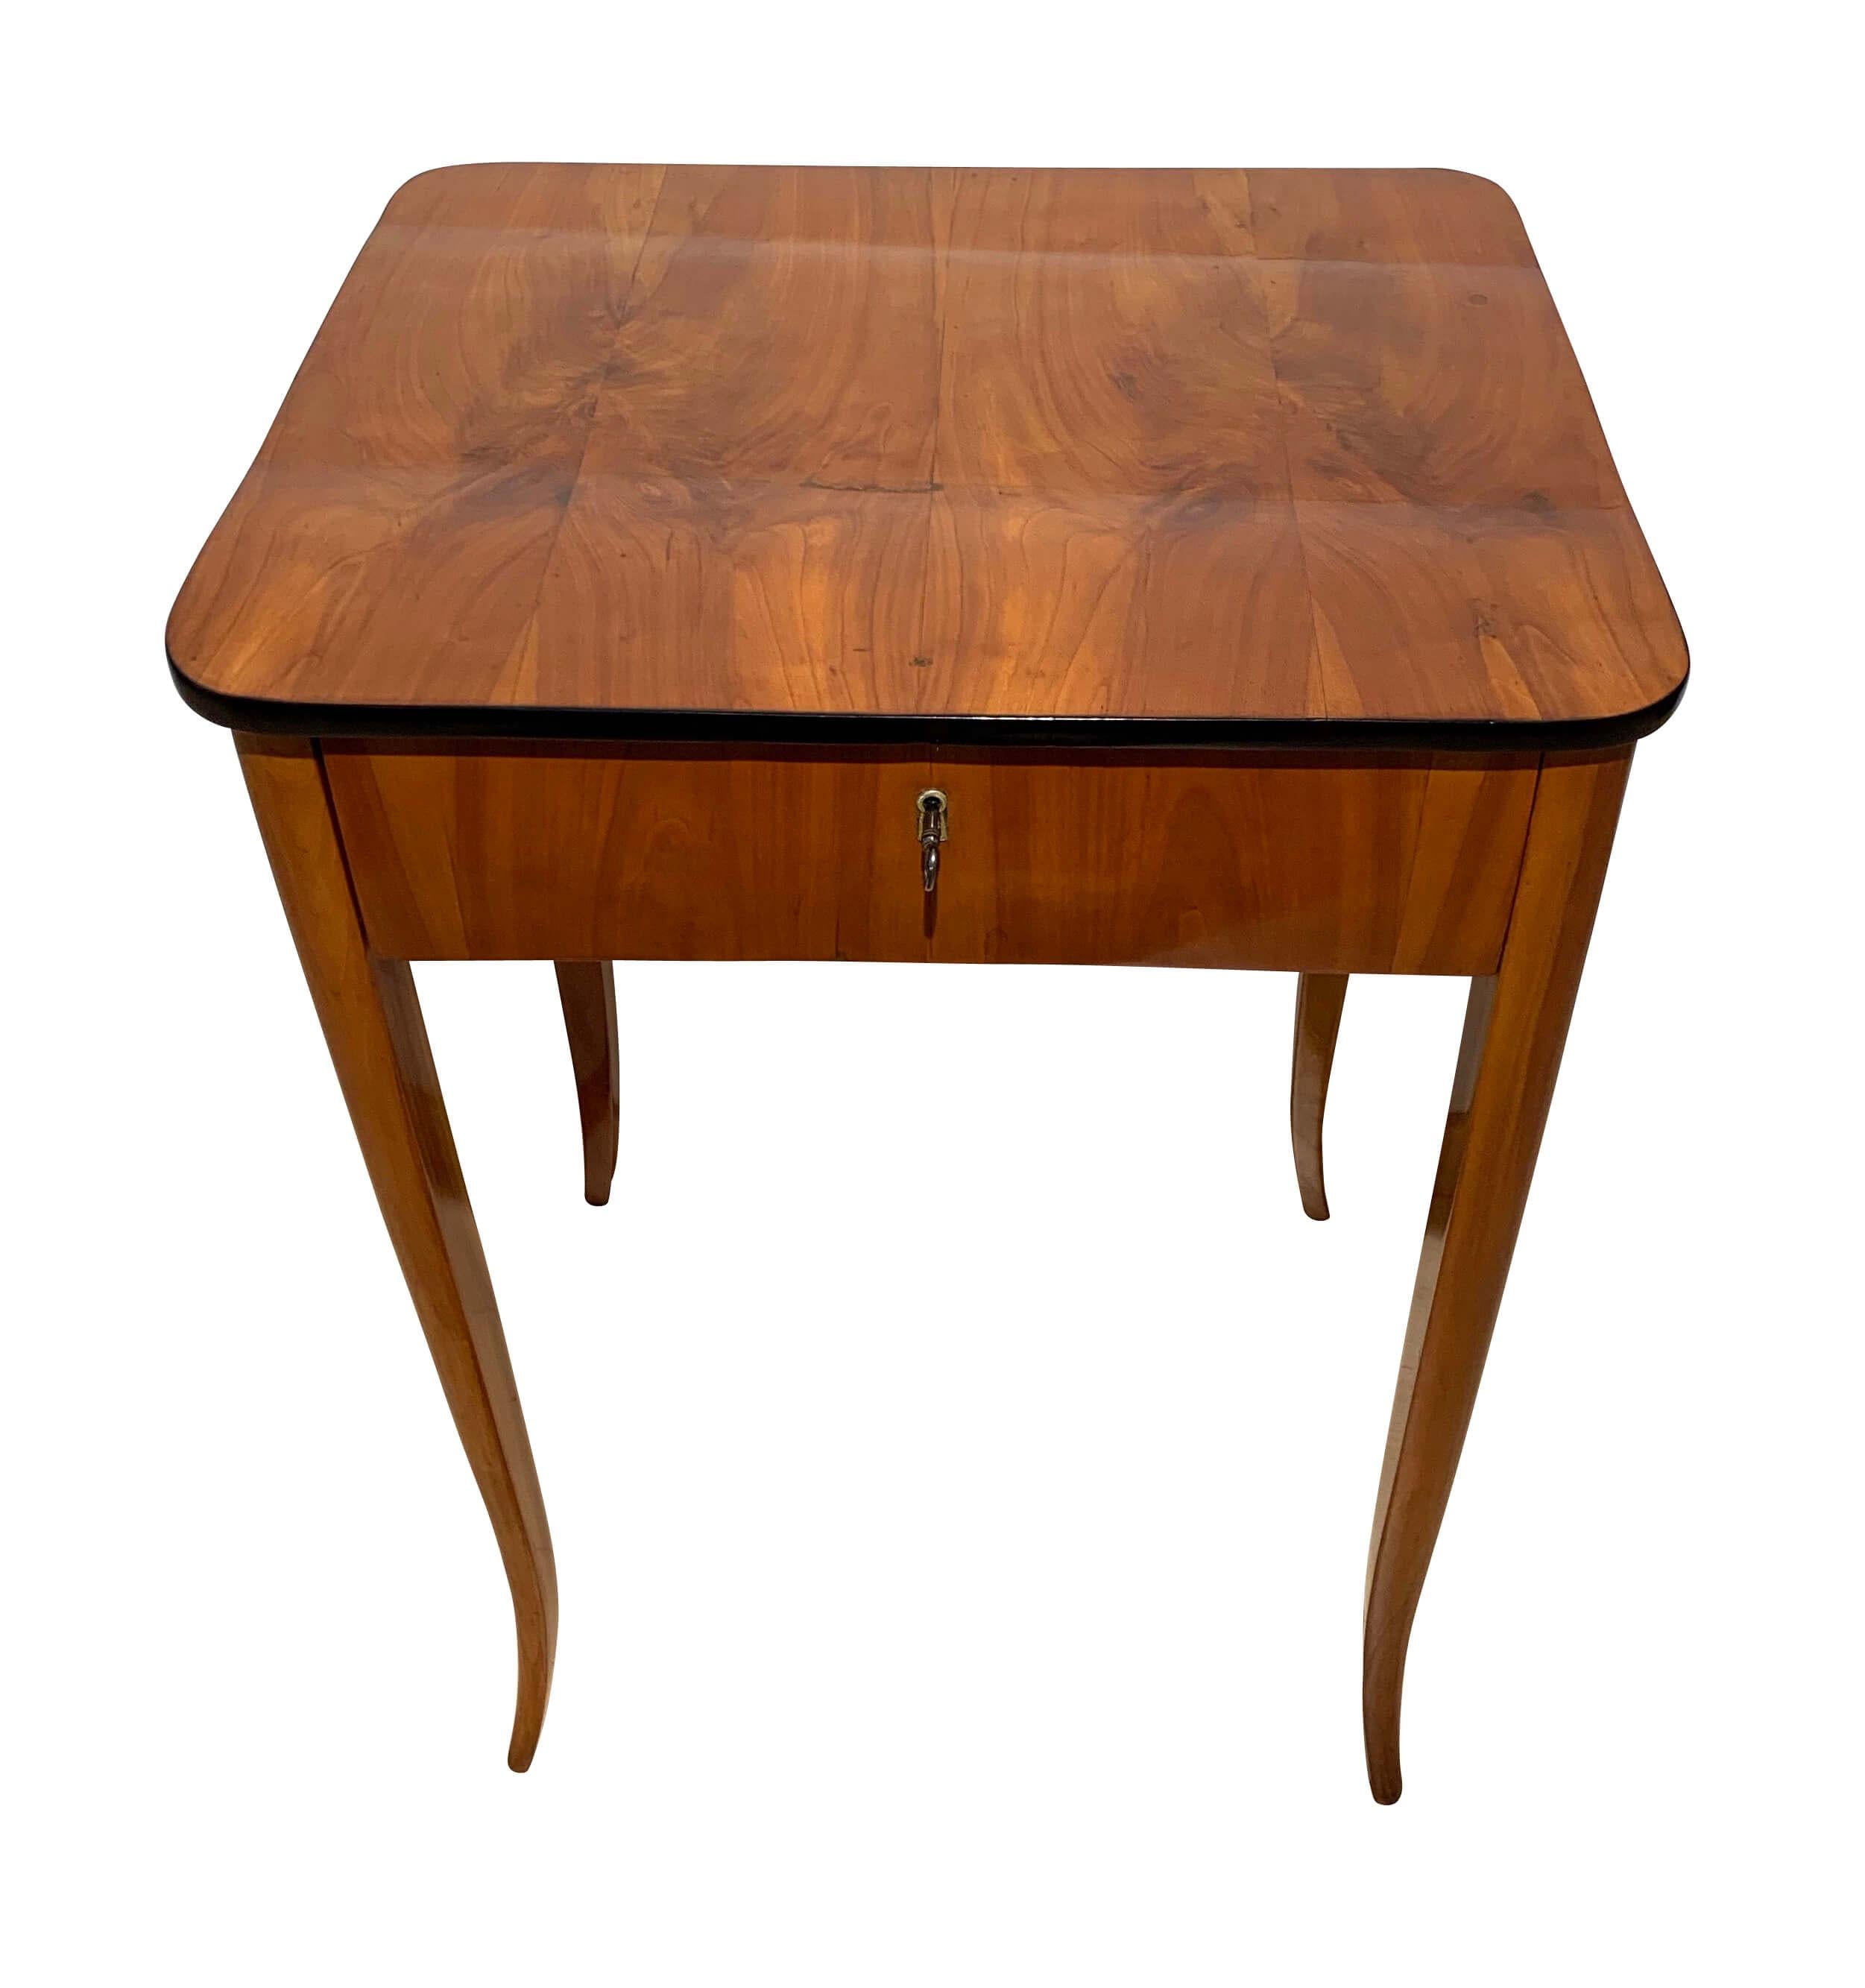 Biedermeier sewing / side table with drawer, cherry veneer, South Germany, circa 1830

Classic Biedermeier sewing or side table. Cherry veneer (plate and apron) and solid wood (legs), hand-polished with shellac (French polish). Elegant conical and